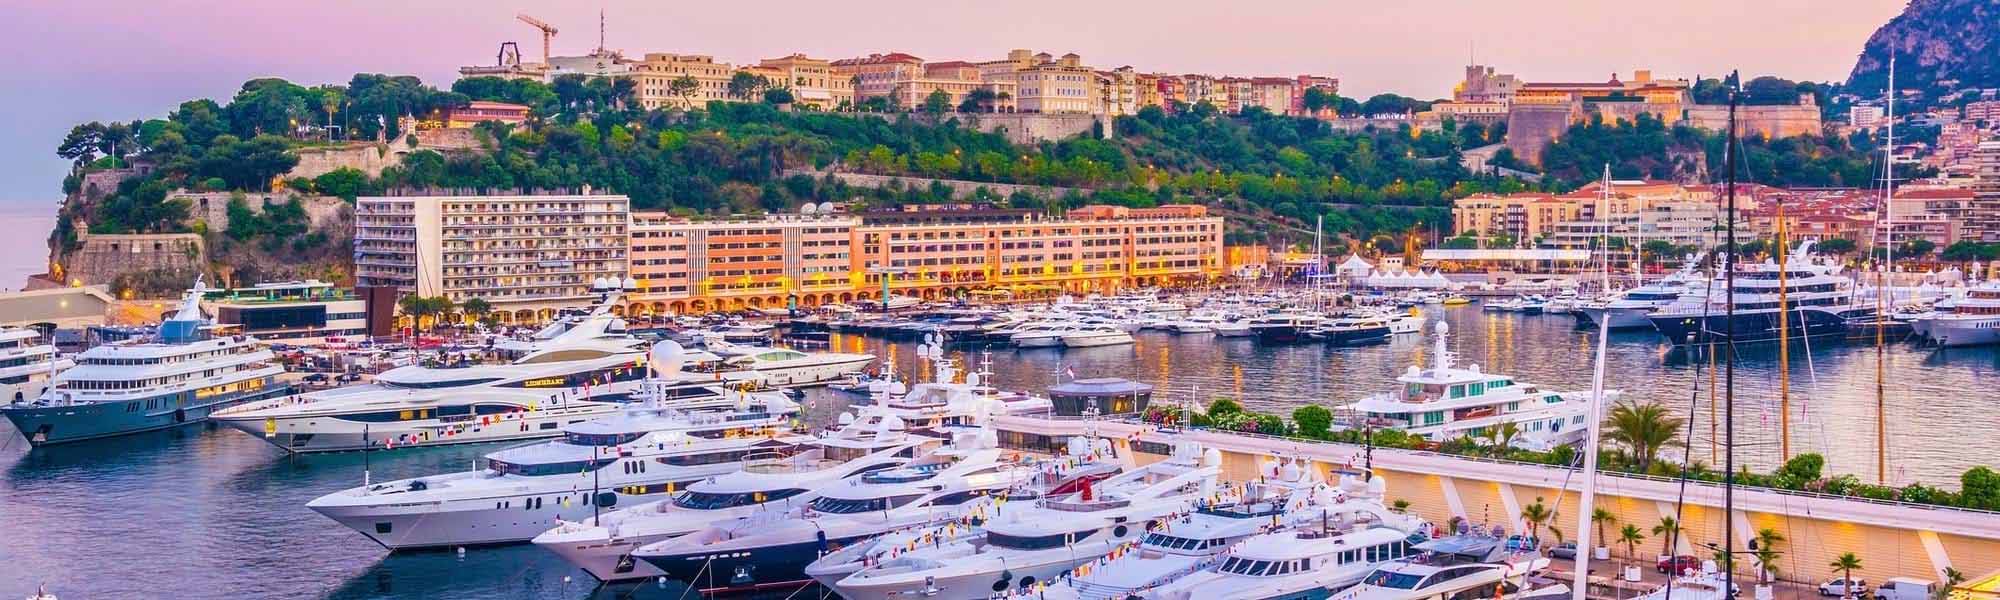 Your guide to the Monaco Yacht Show.